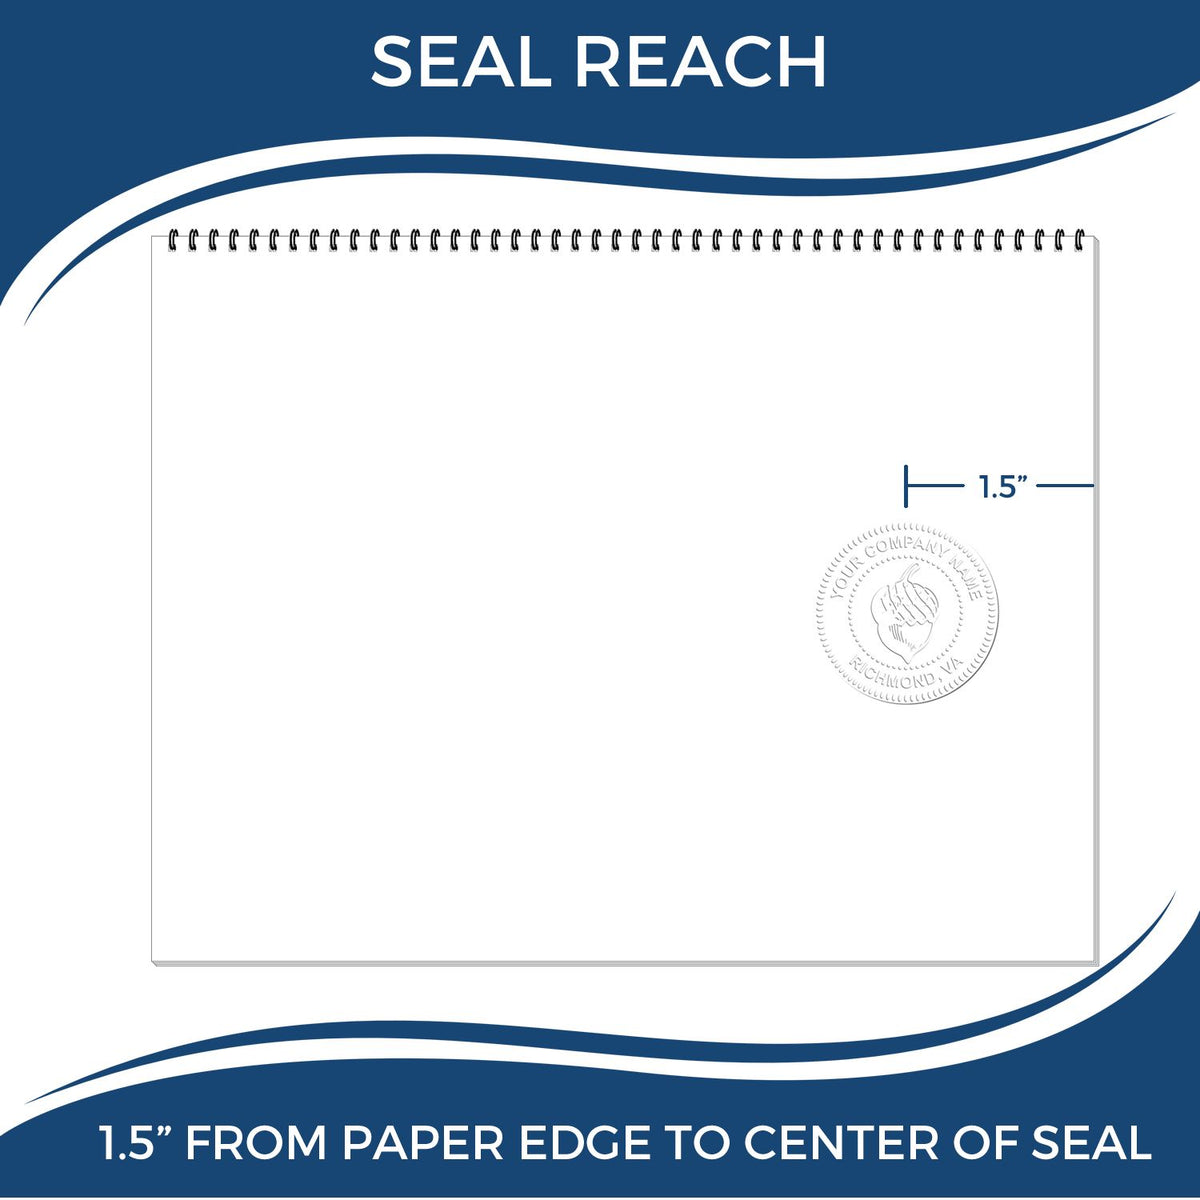 An infographic showing the seal reach which is represented by a ruler and a miniature seal image of the Handheld Hawaii Land Surveyor Seal